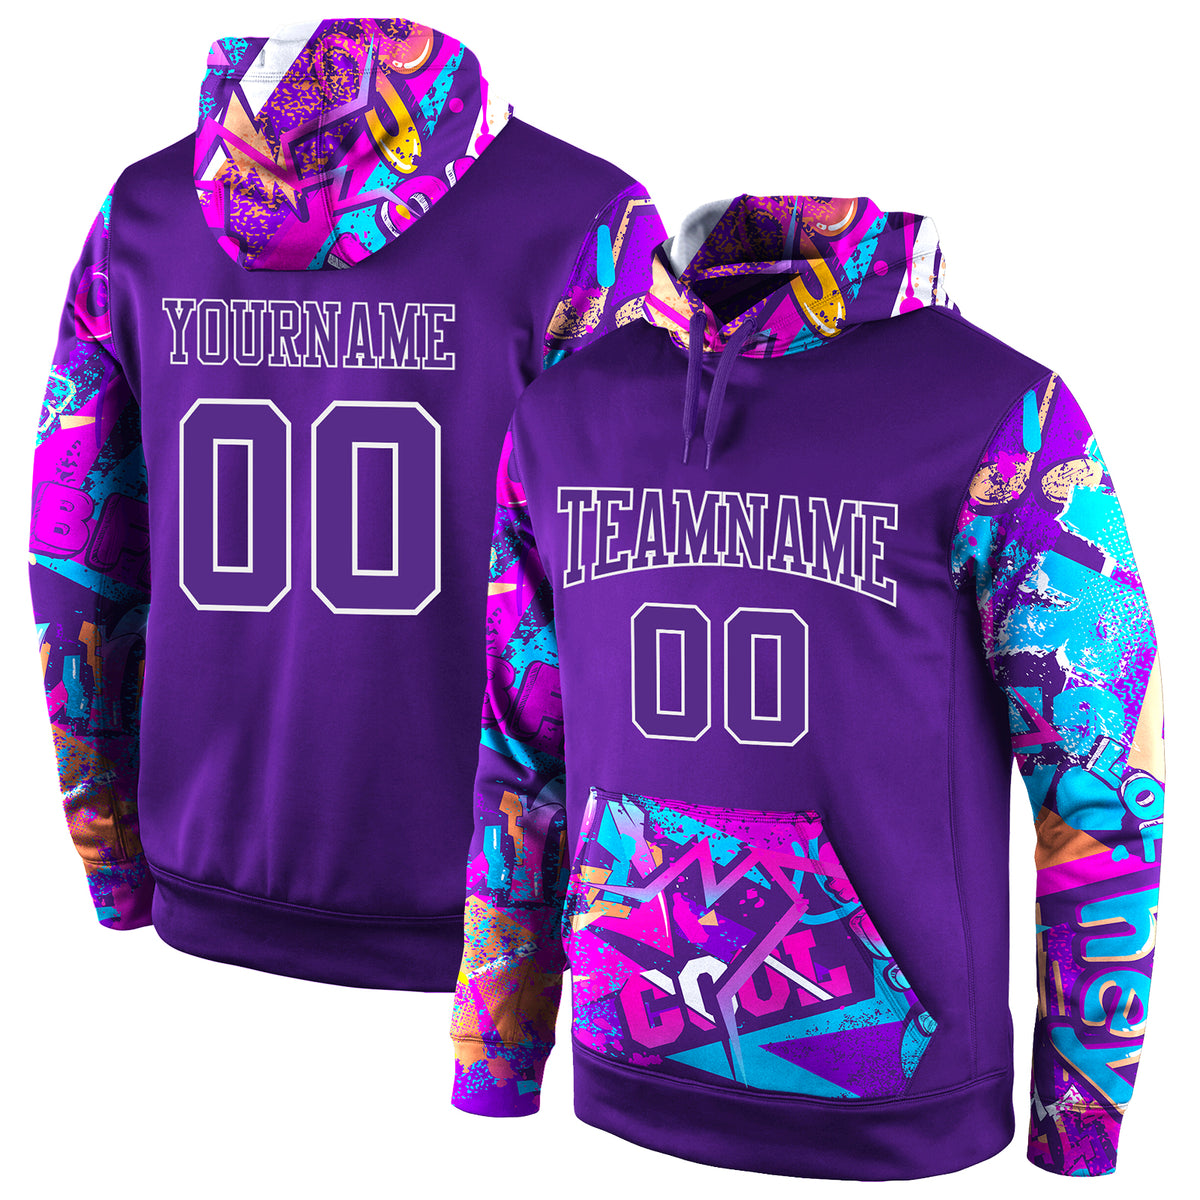 Cool Sublimation Hoodies, Sweaters, & Sweatshirts for Men